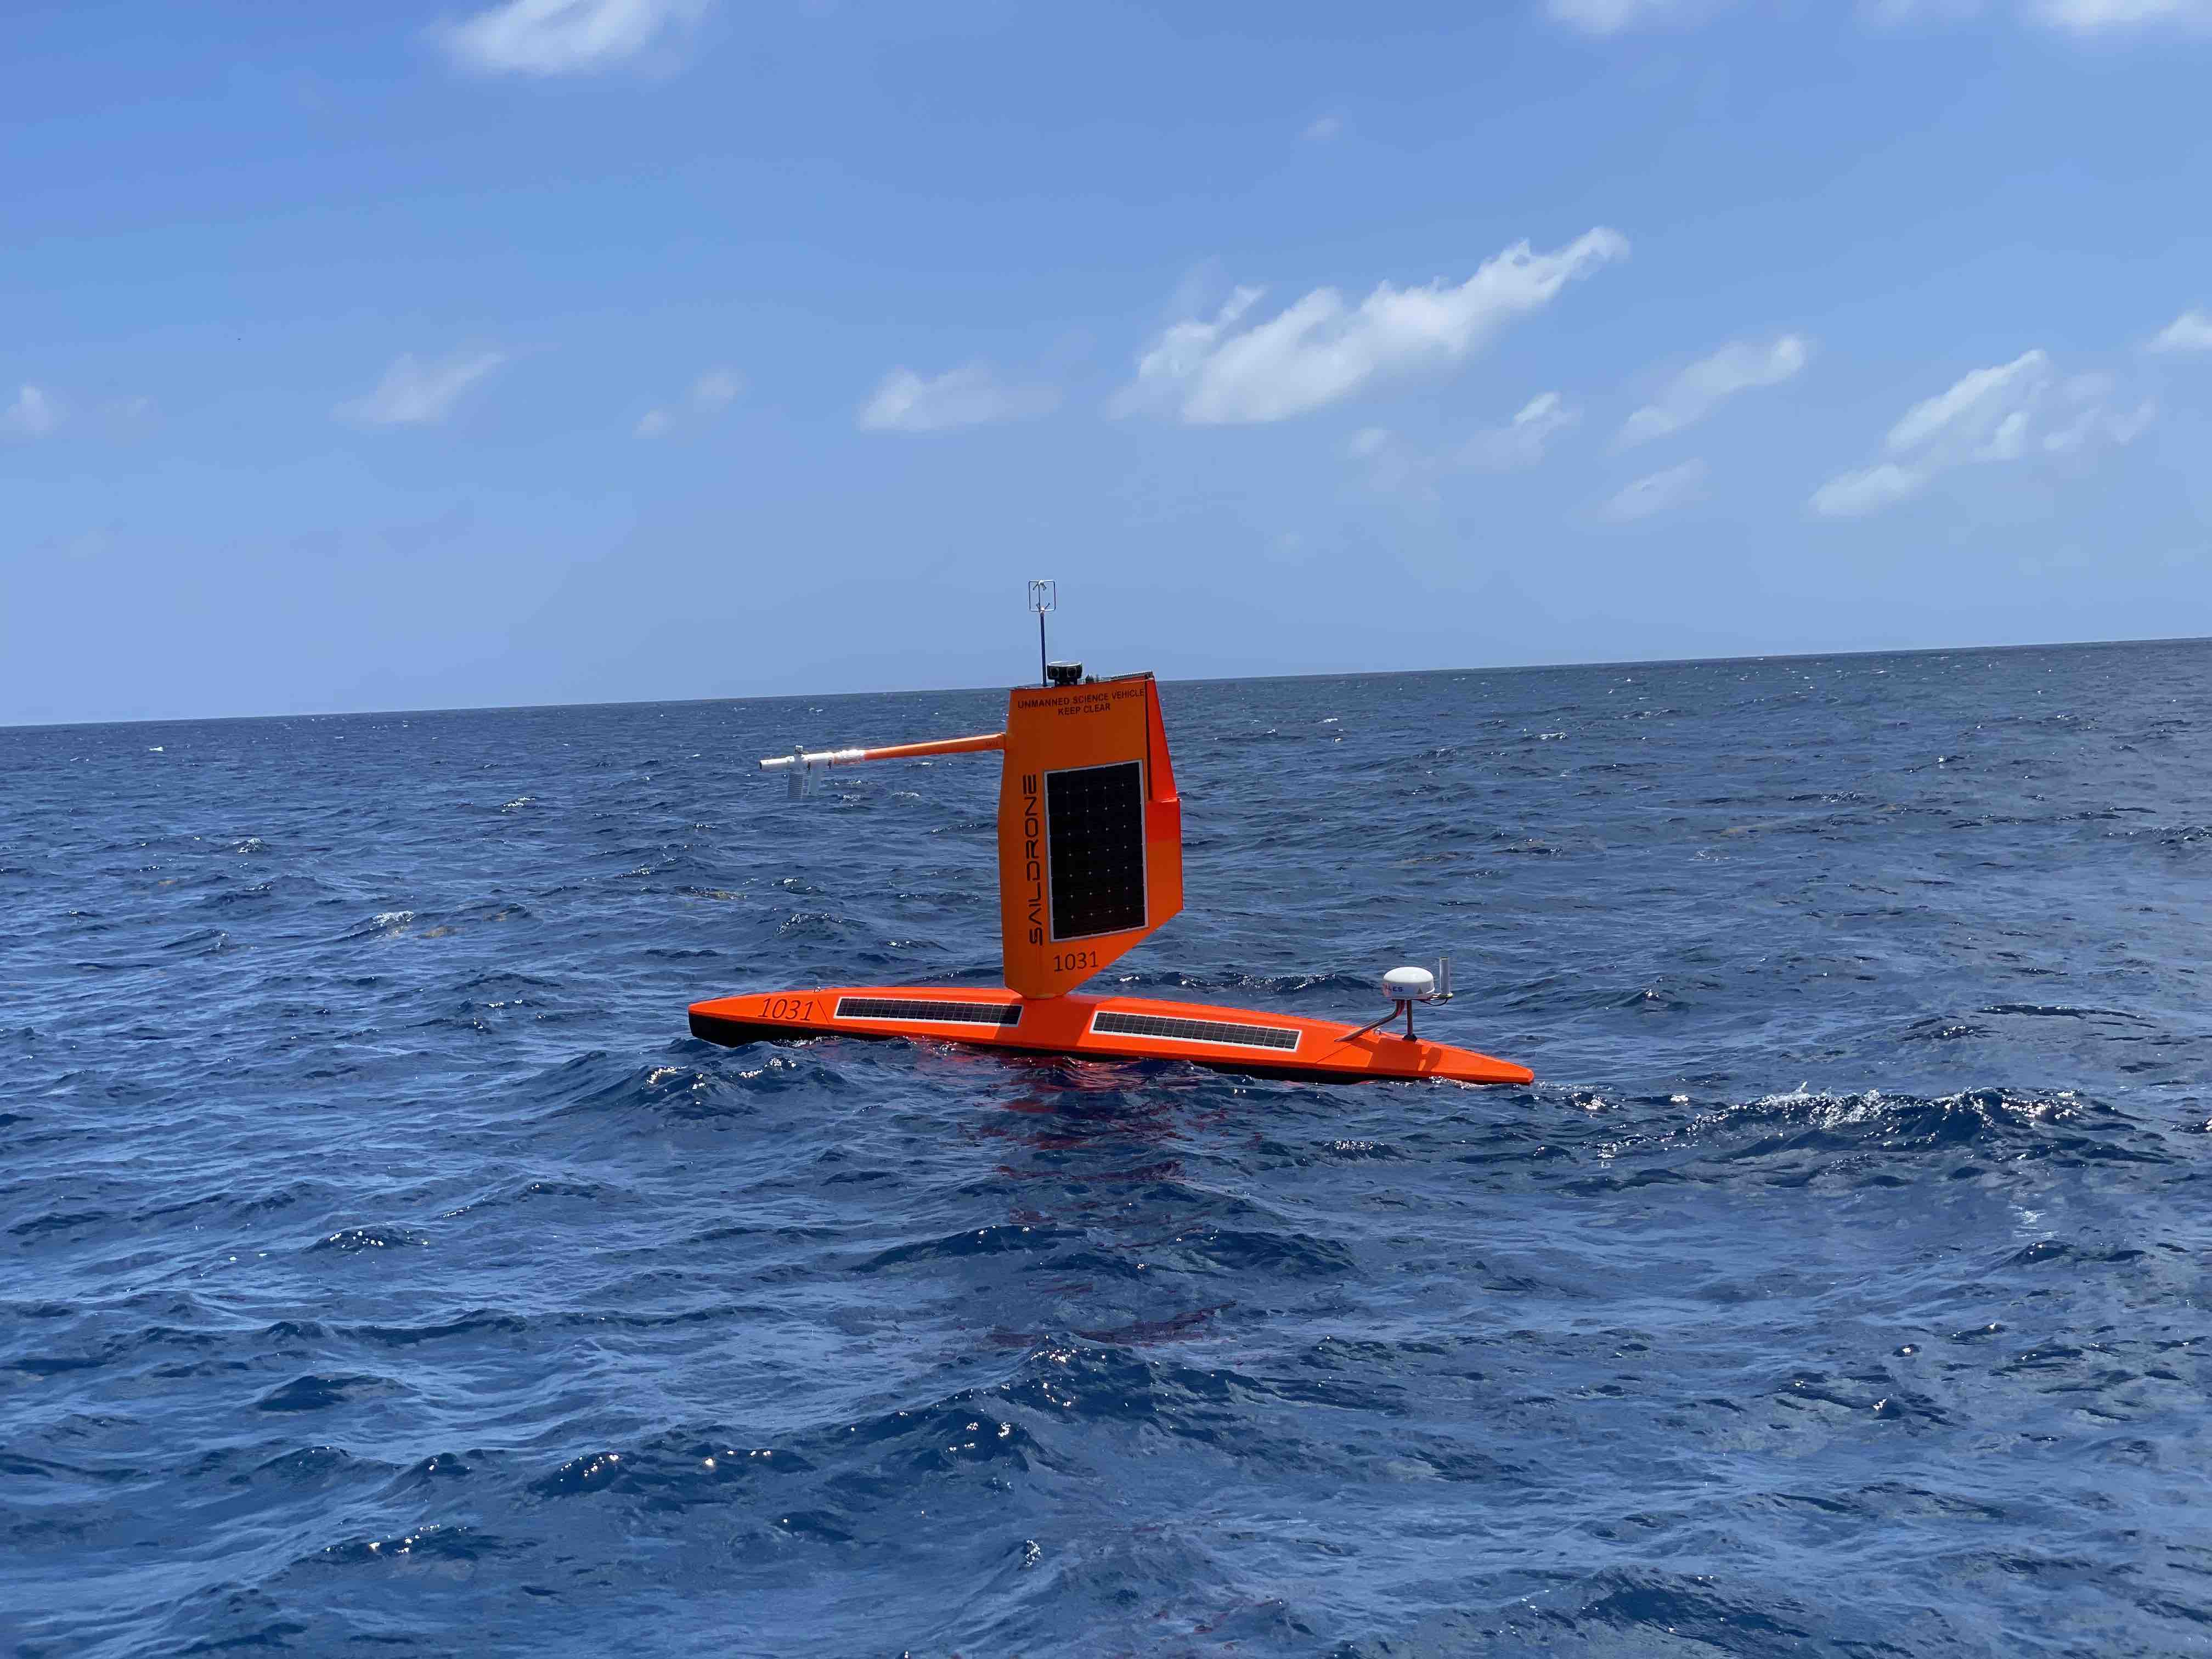 Saildrone SD-1031 floating on open water under blue skies